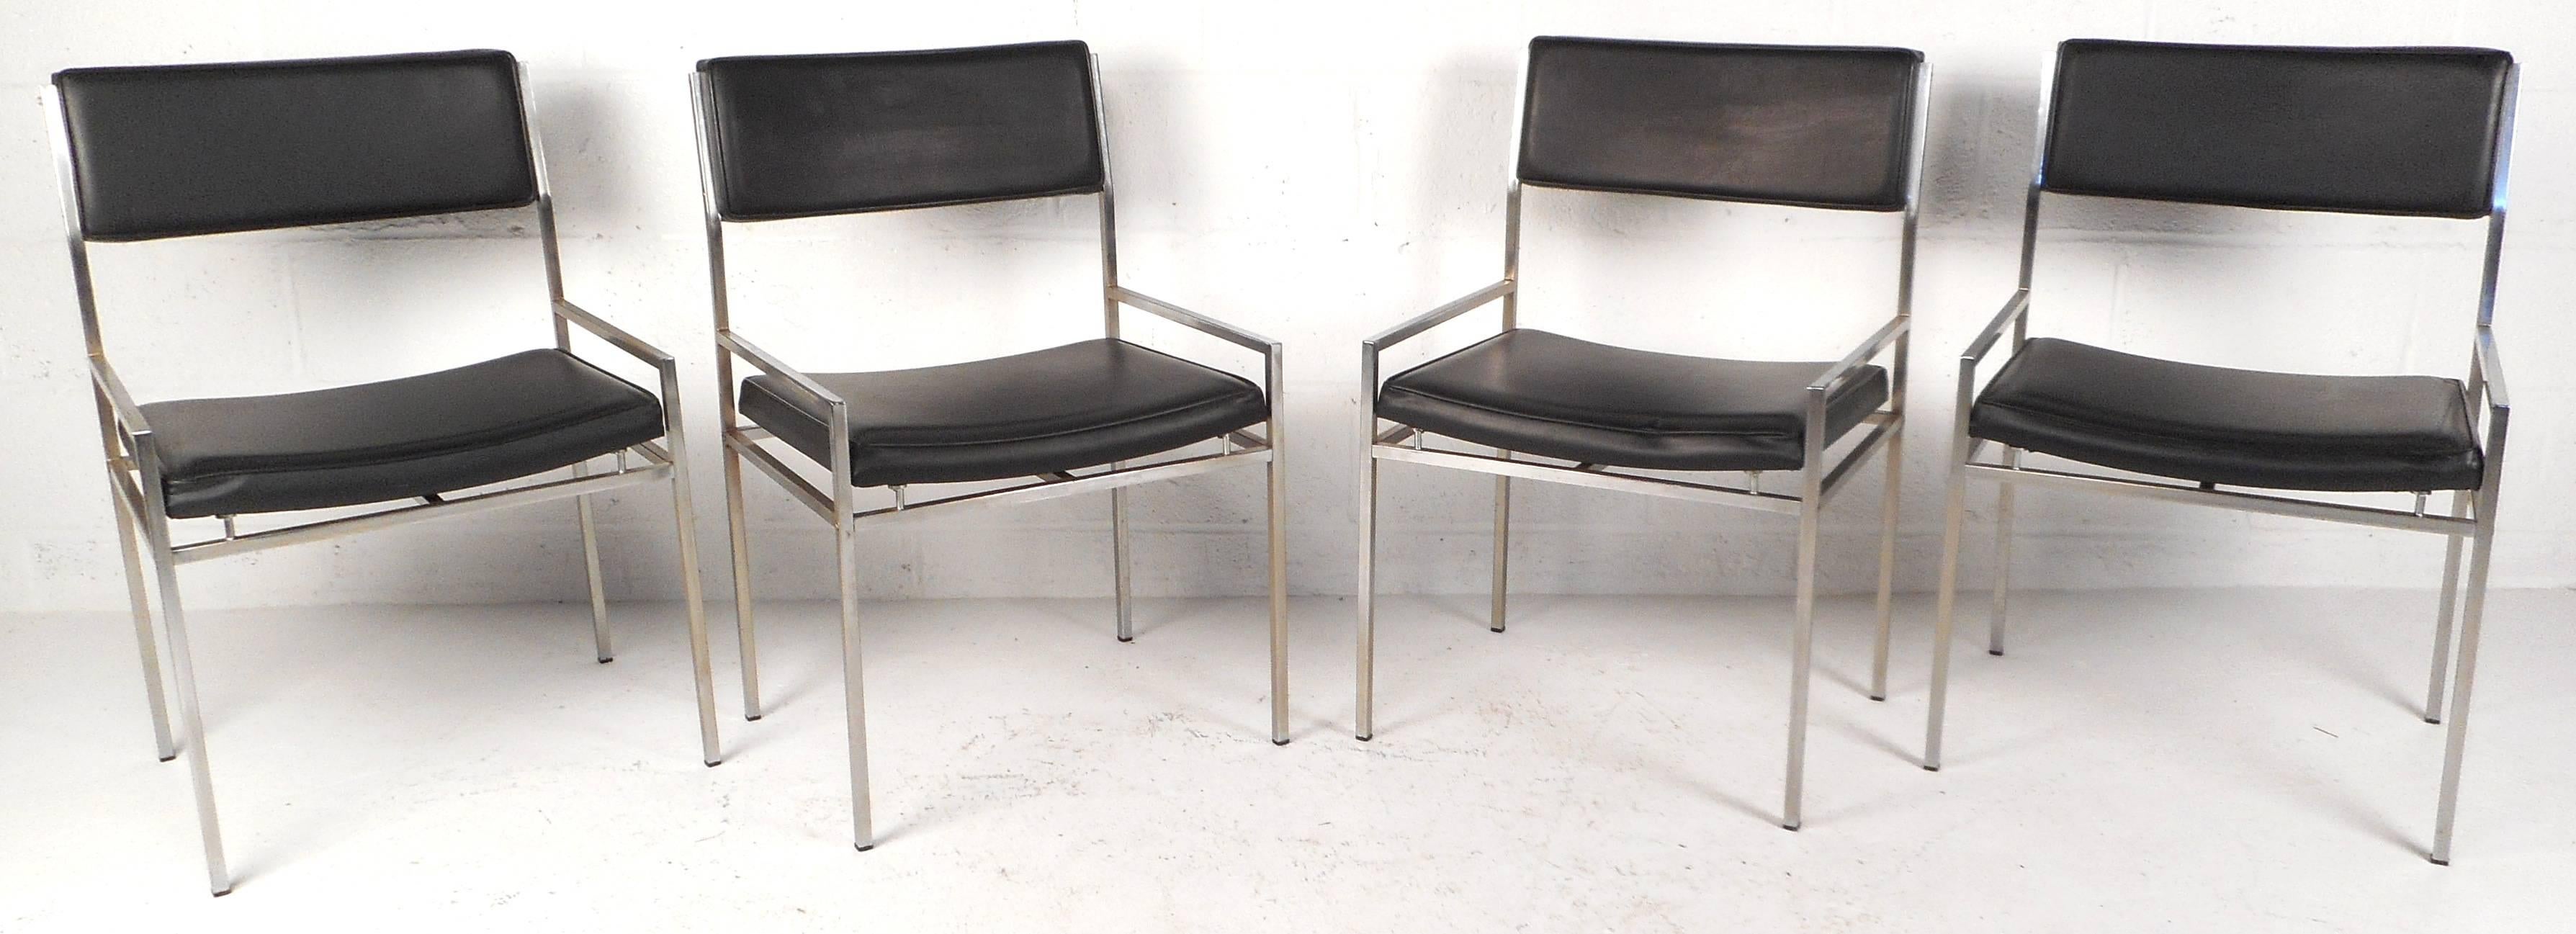 Stylish set of four vintage modern dining chairs feature unique low armrests, a sturdy chrome frame, and black vinyl upholstery. The sleek design has a slanted backrest and scooped seat ensuring optimal comfort in any seating arrangement. Please